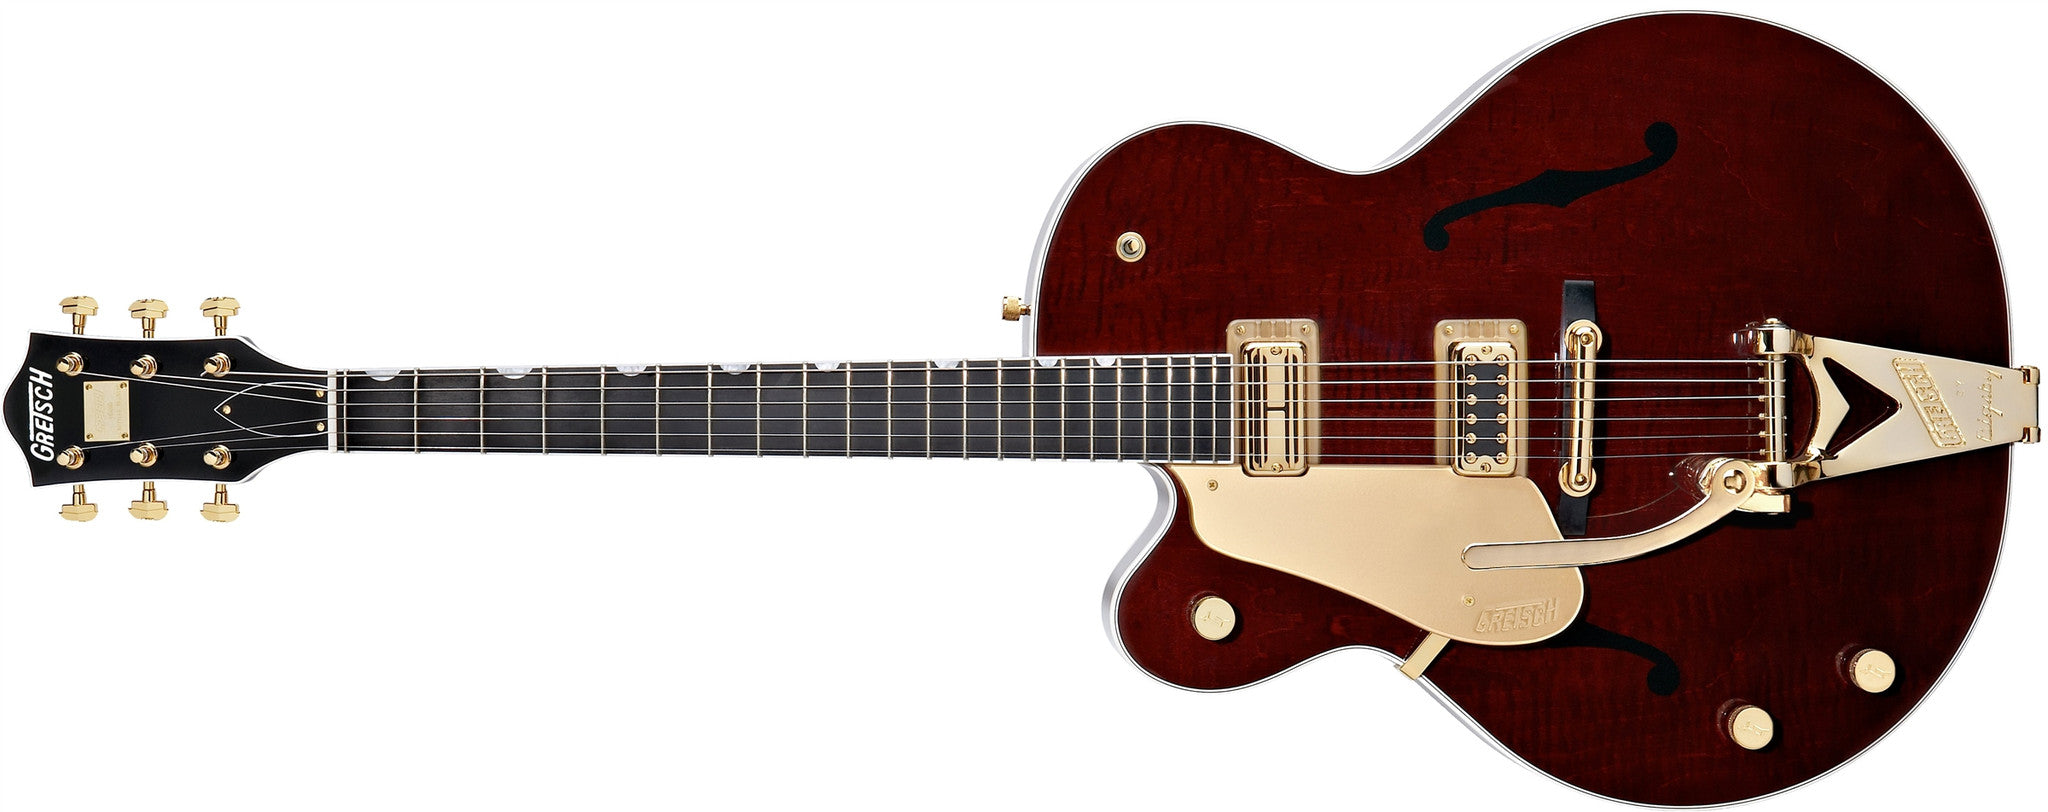 Gretsch G6122-1959LH Chet Atkins Country Gentleman, Left-Handed,  Ebony Fingerboard, Walnut Stain, with Bigsby 2401124892 - L.A. Music - Canada's Favourite Music Store!